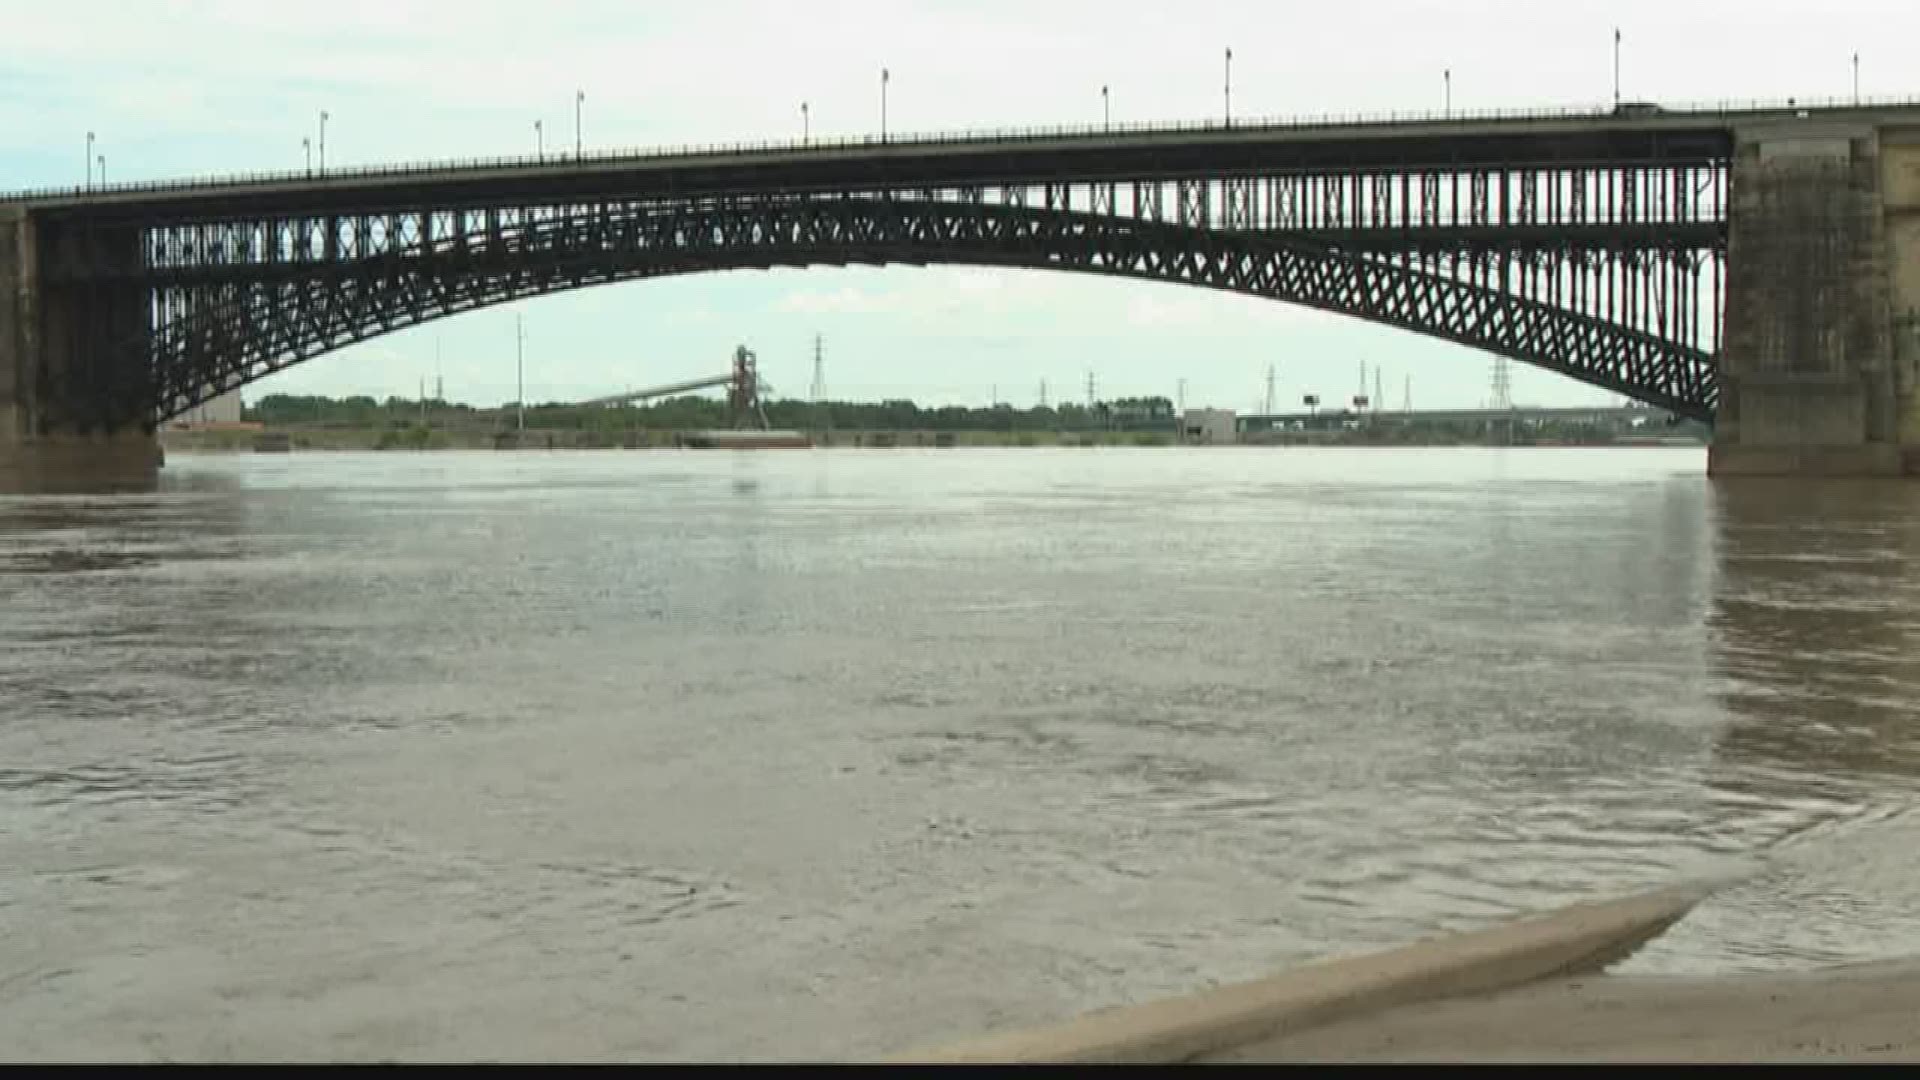 The Mississippi River in St. Louis has finally fallen below flood stage for the first time since March. It's far from clean on Lenore K. Sullivan Boulevard, but the water is mostly gone, the street is visible again and businesses that had been shut down for months are finally open again.